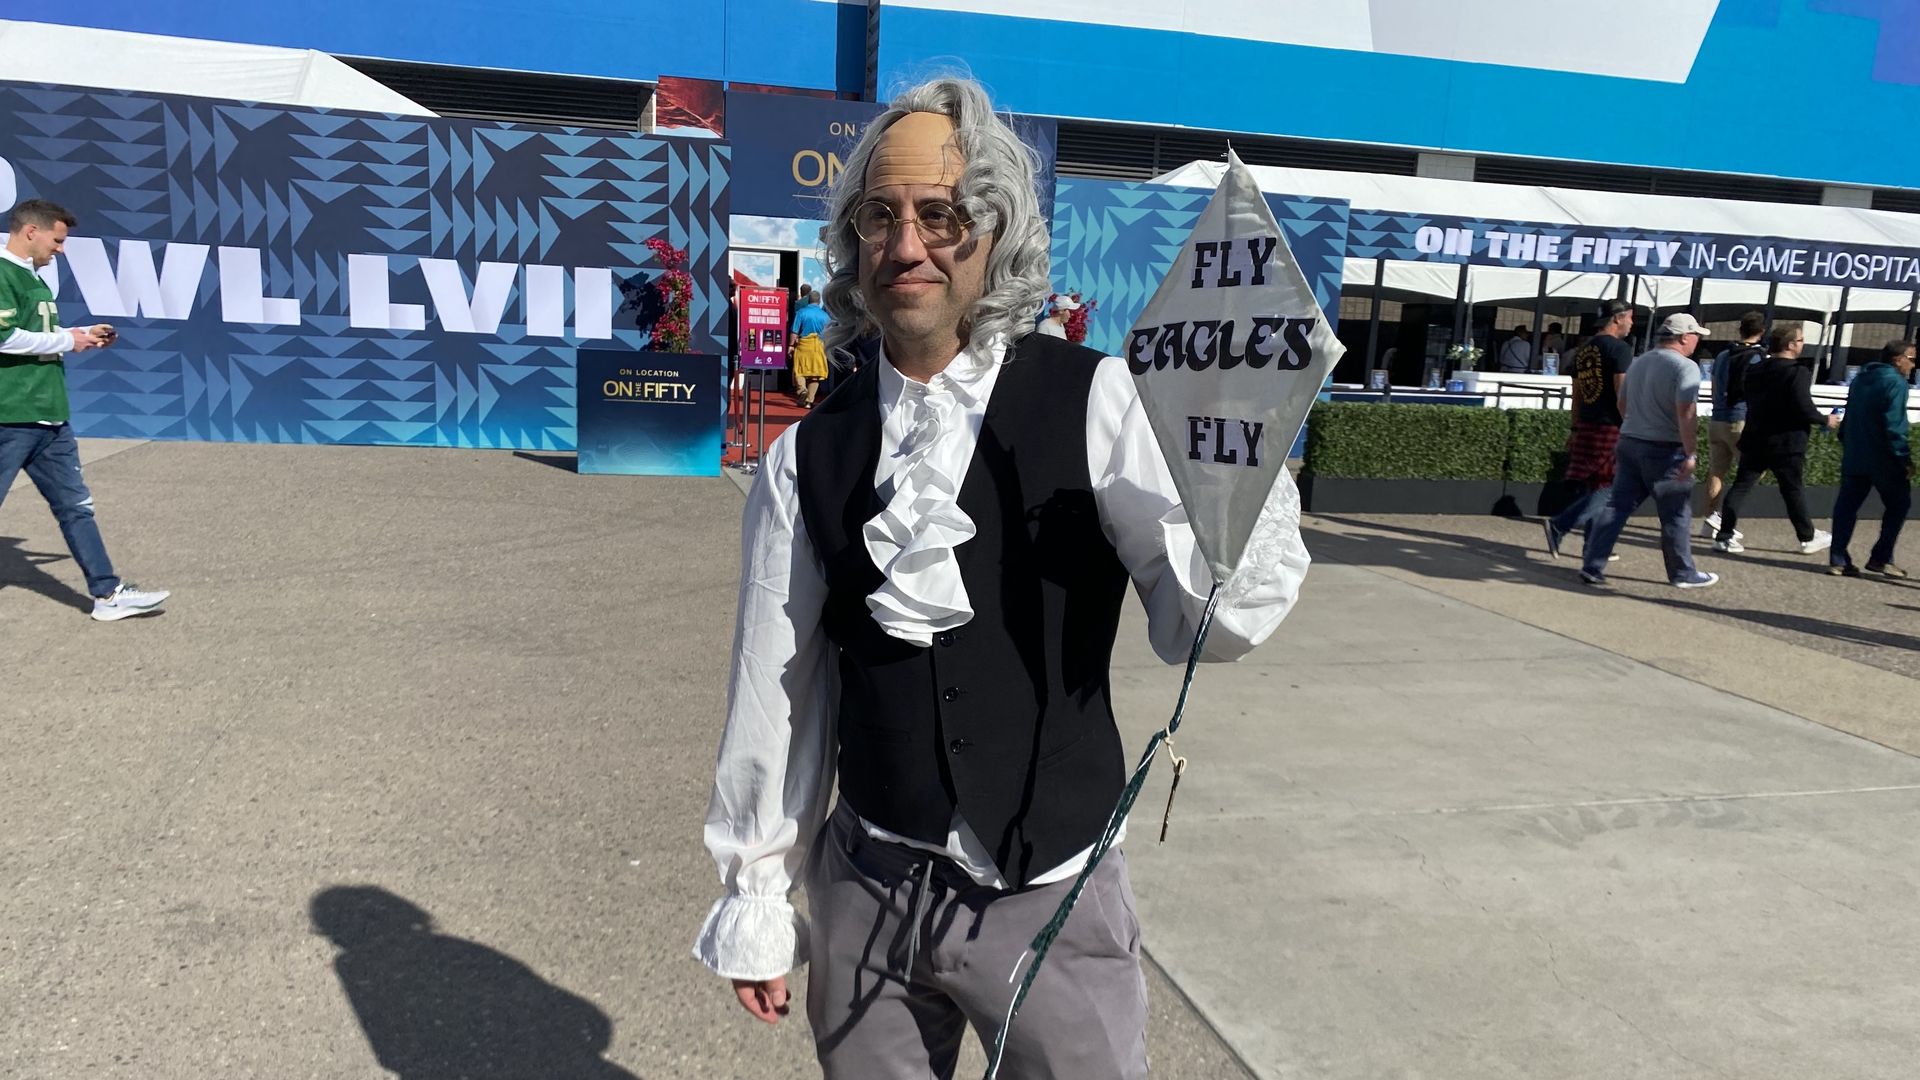 A man dressed as Benjamin Franklin holding a sign that says Fly Eagles Fly.